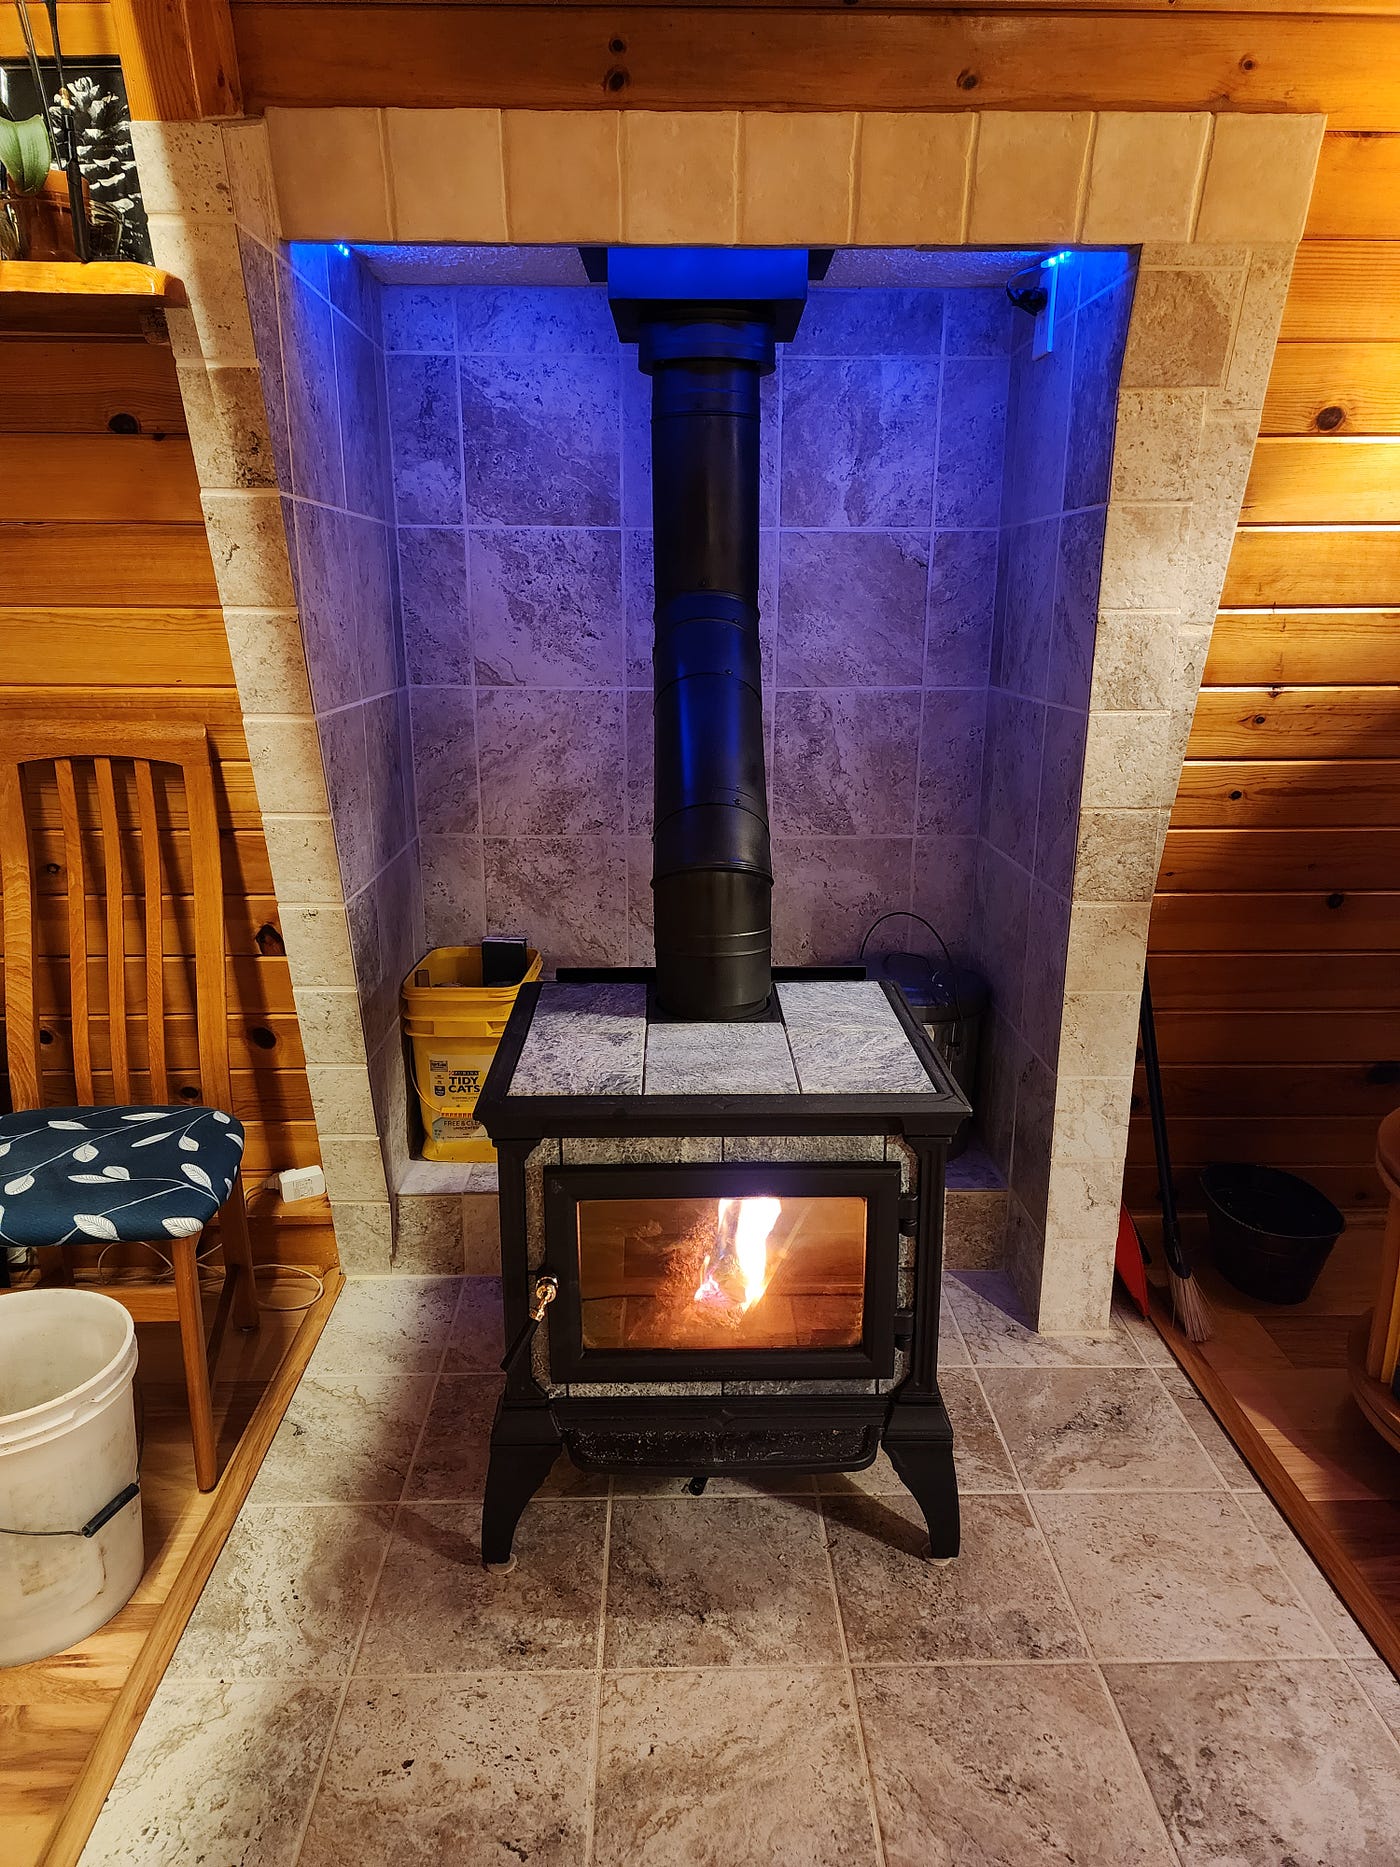 woodstove - Using self-leveling cement as a wood stove's stove